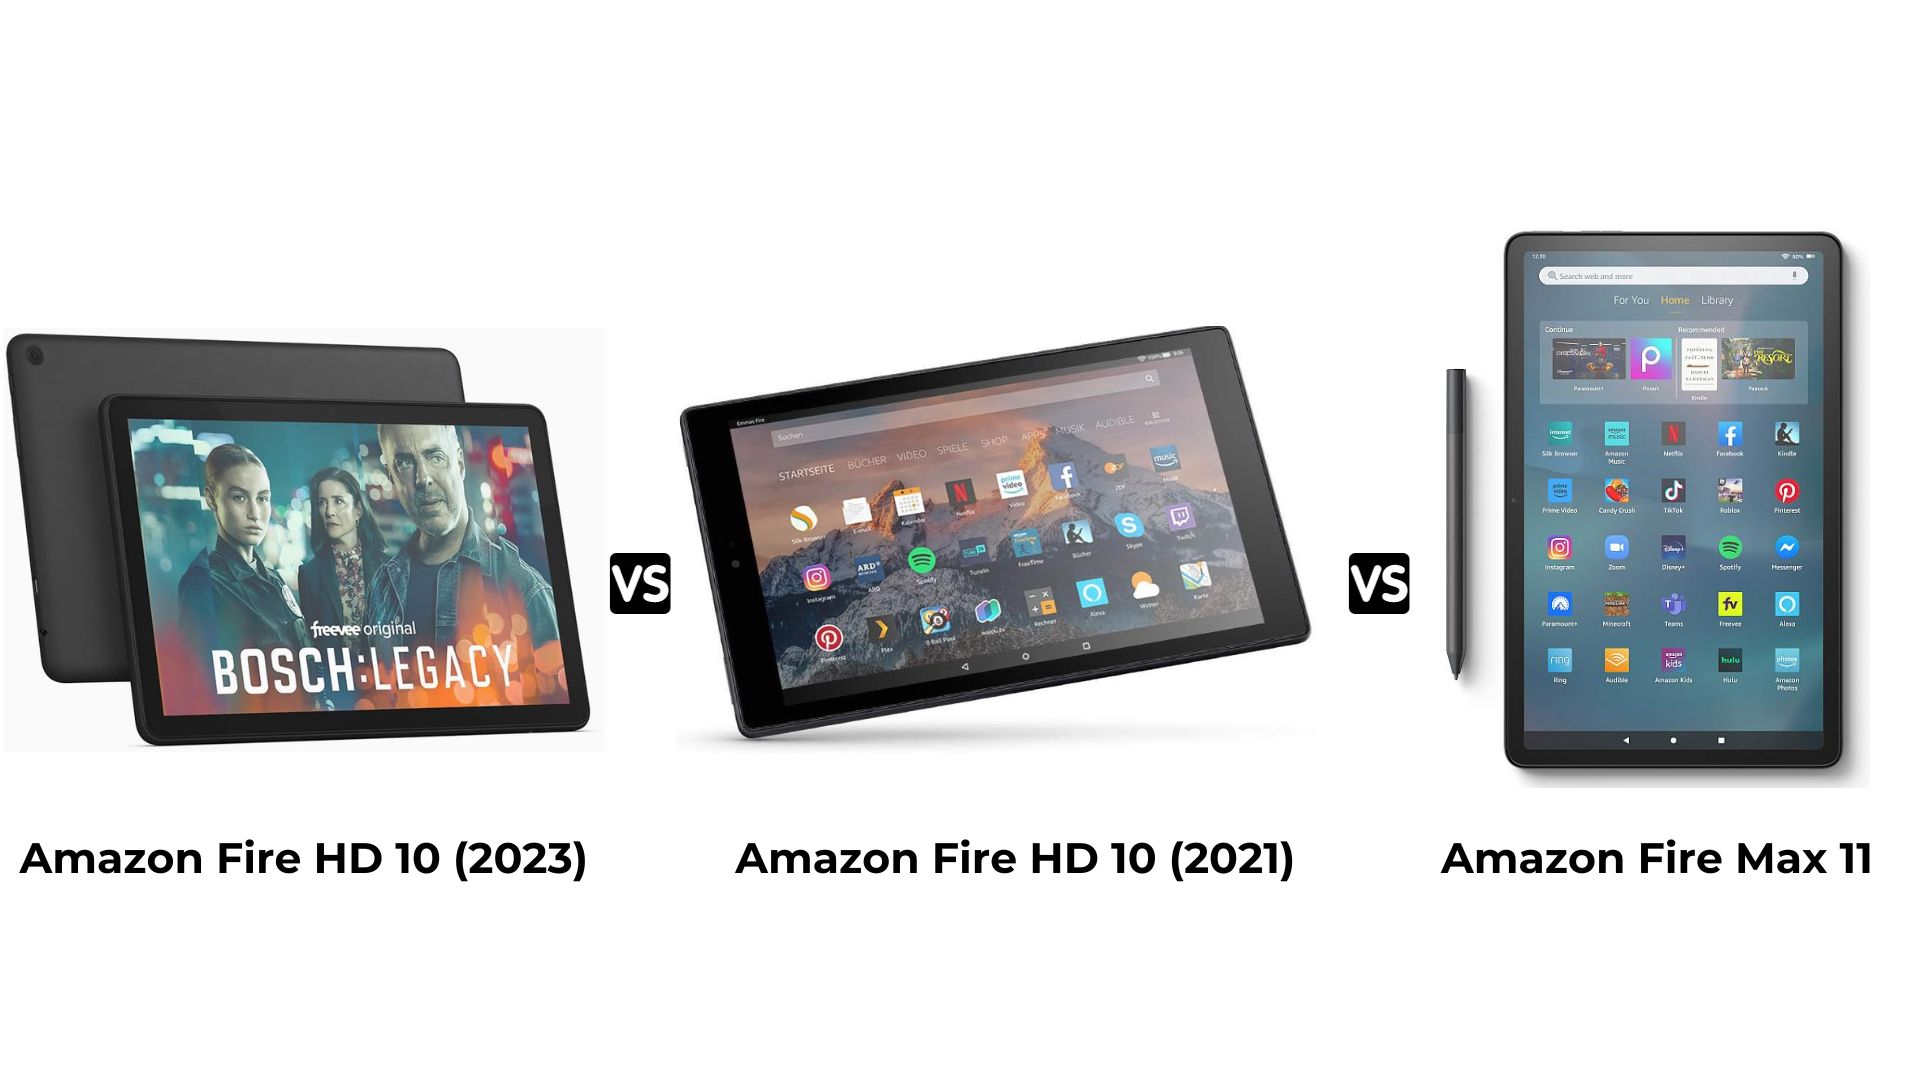 Fire HD 10 (2023) vs Fire HD 10 (2021): What's the difference?